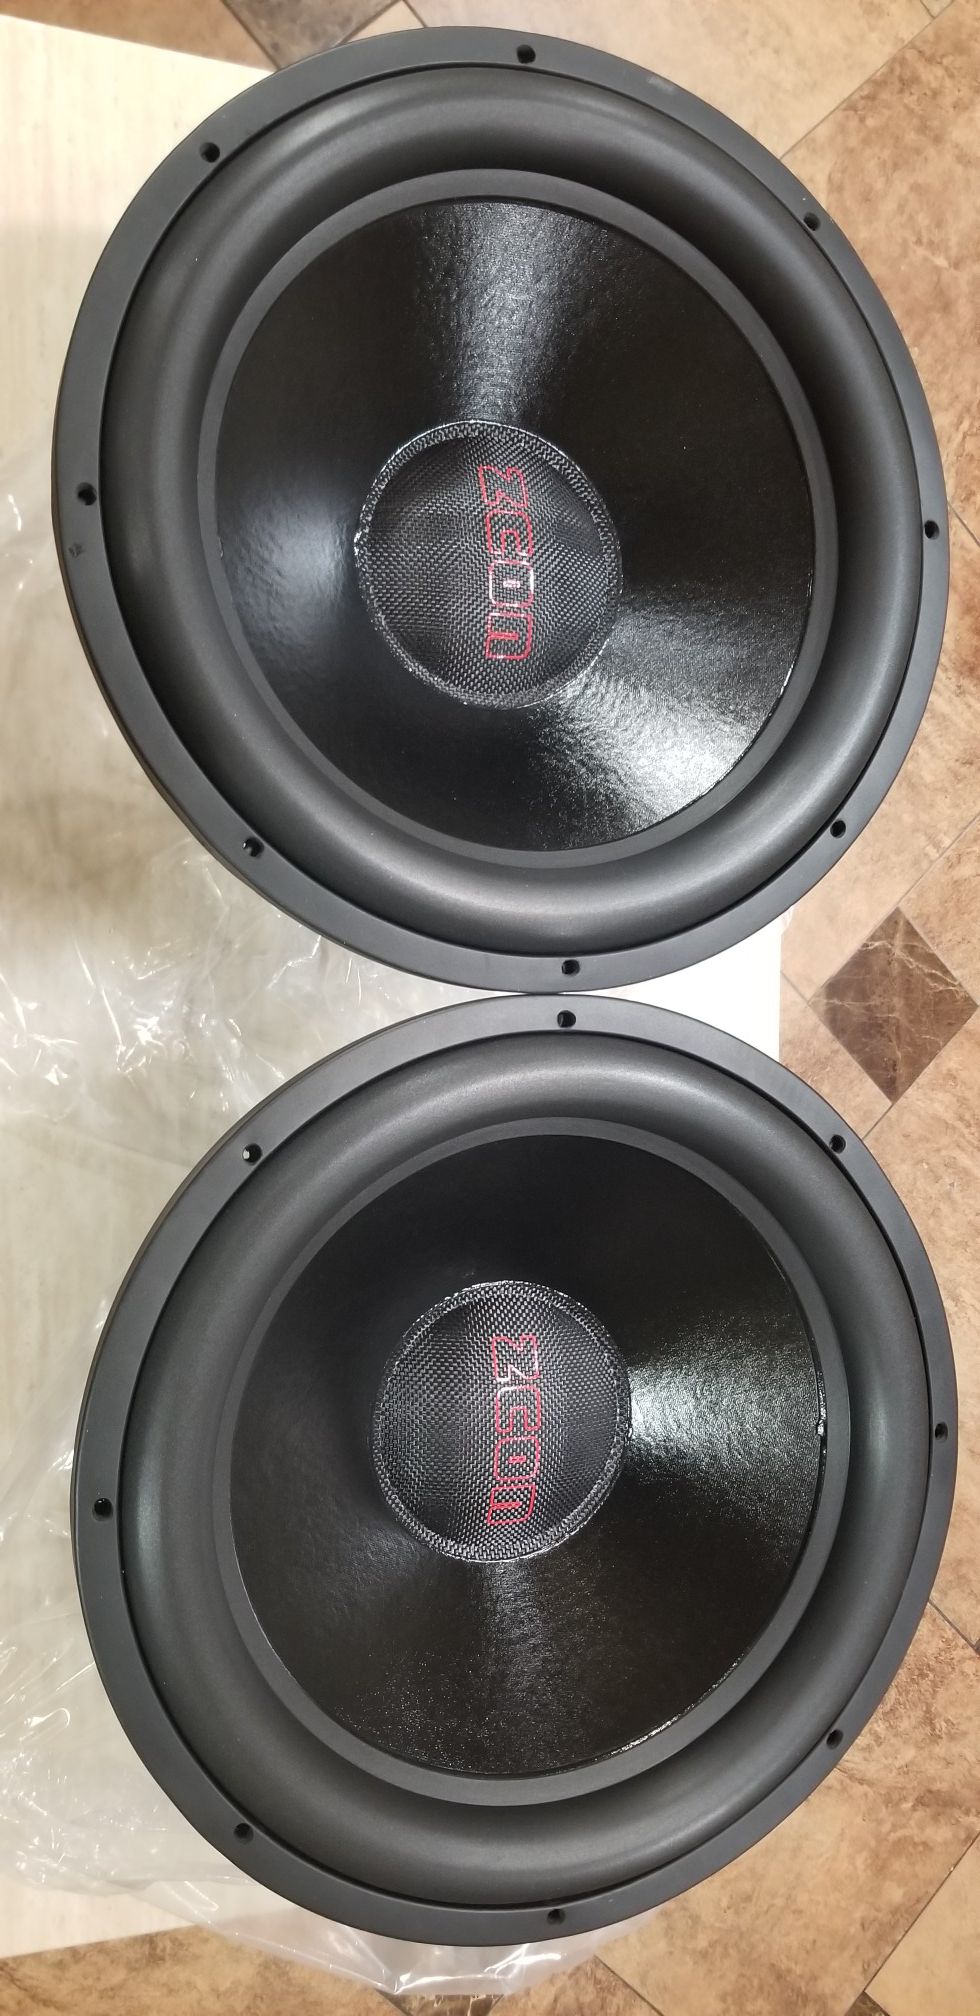 Zcon 18" SUBWOOFERS